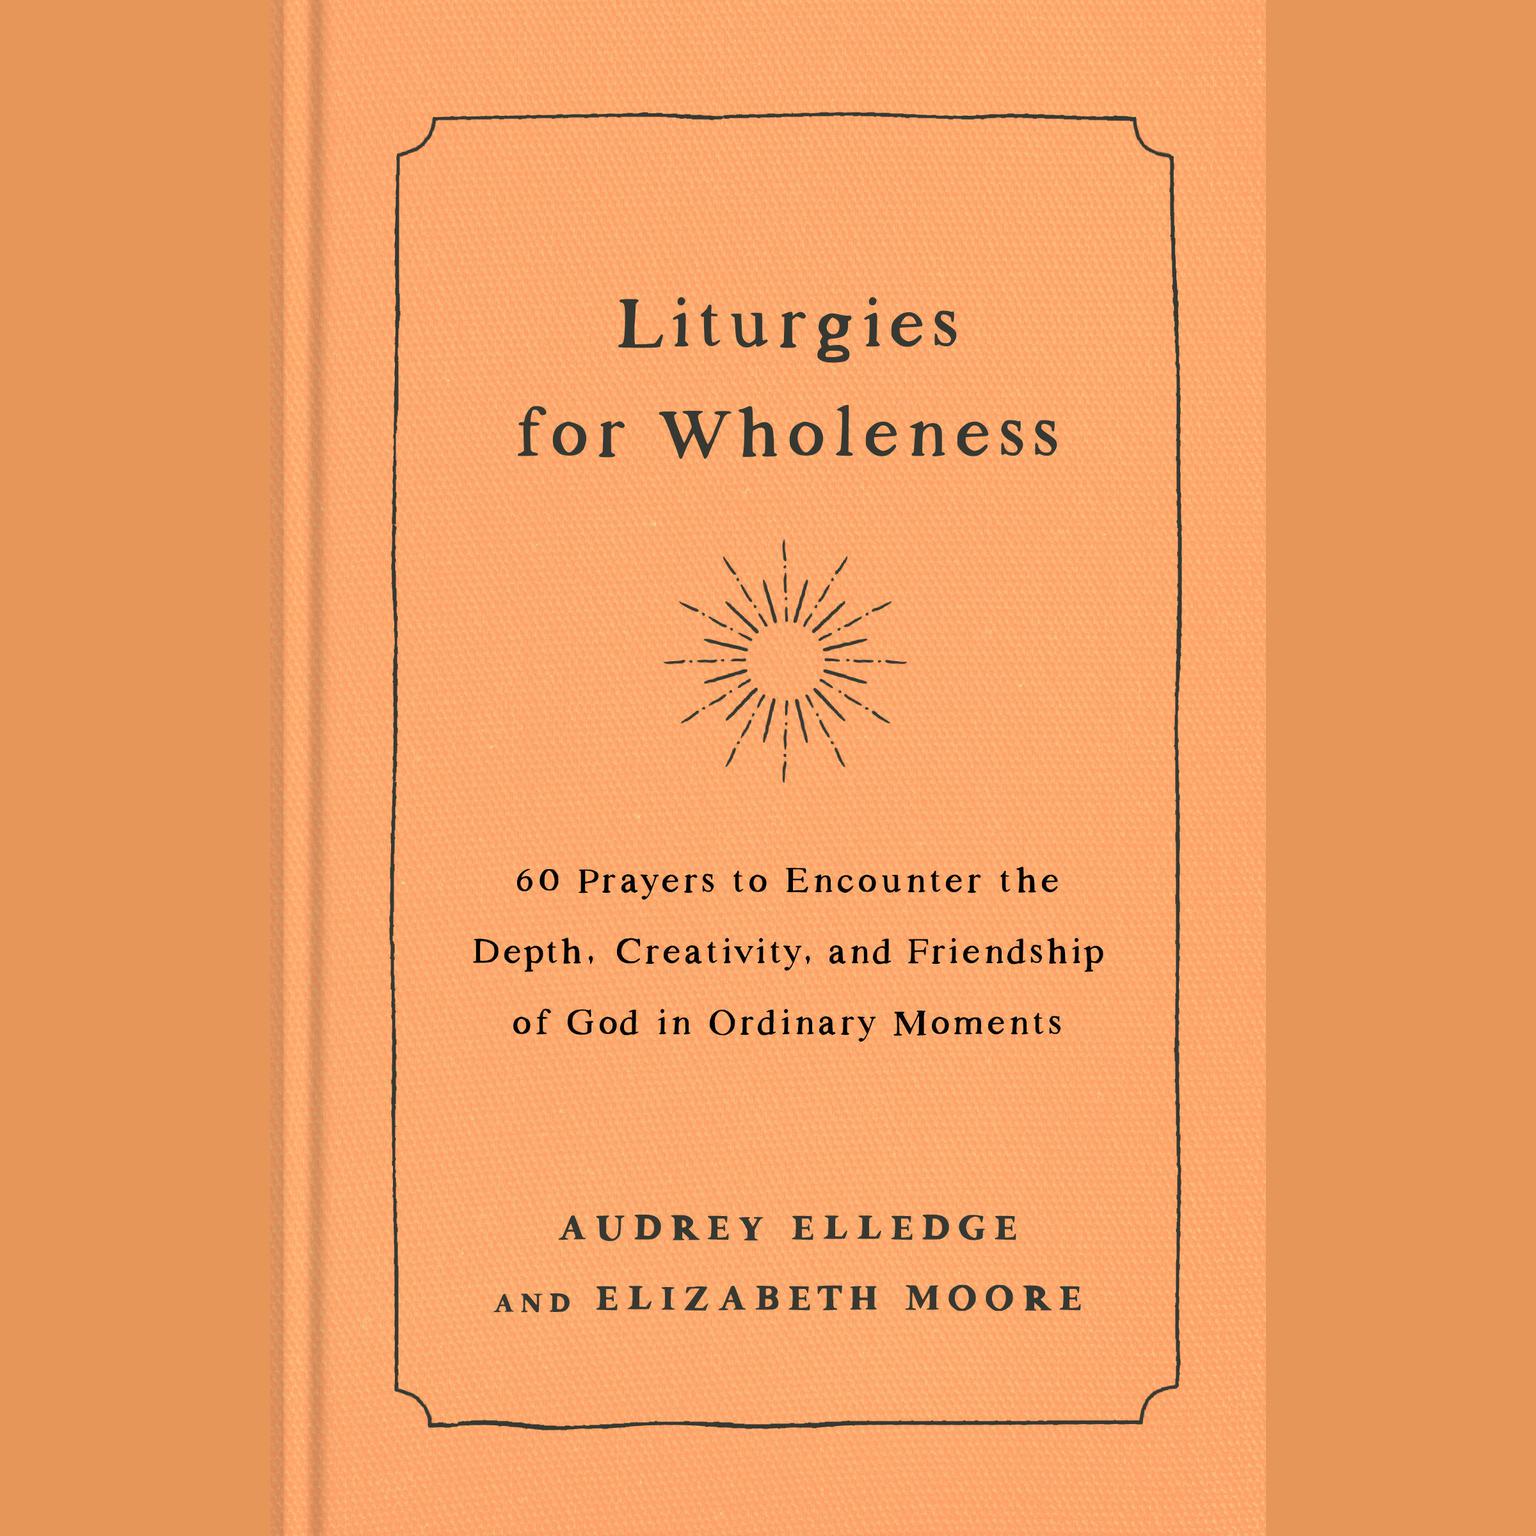 Liturgies for Wholeness: 60 Prayers to Encounter the Depth, Creativity, and Friendship of God in Ordinary Moments Audiobook, by Audrey Elledge